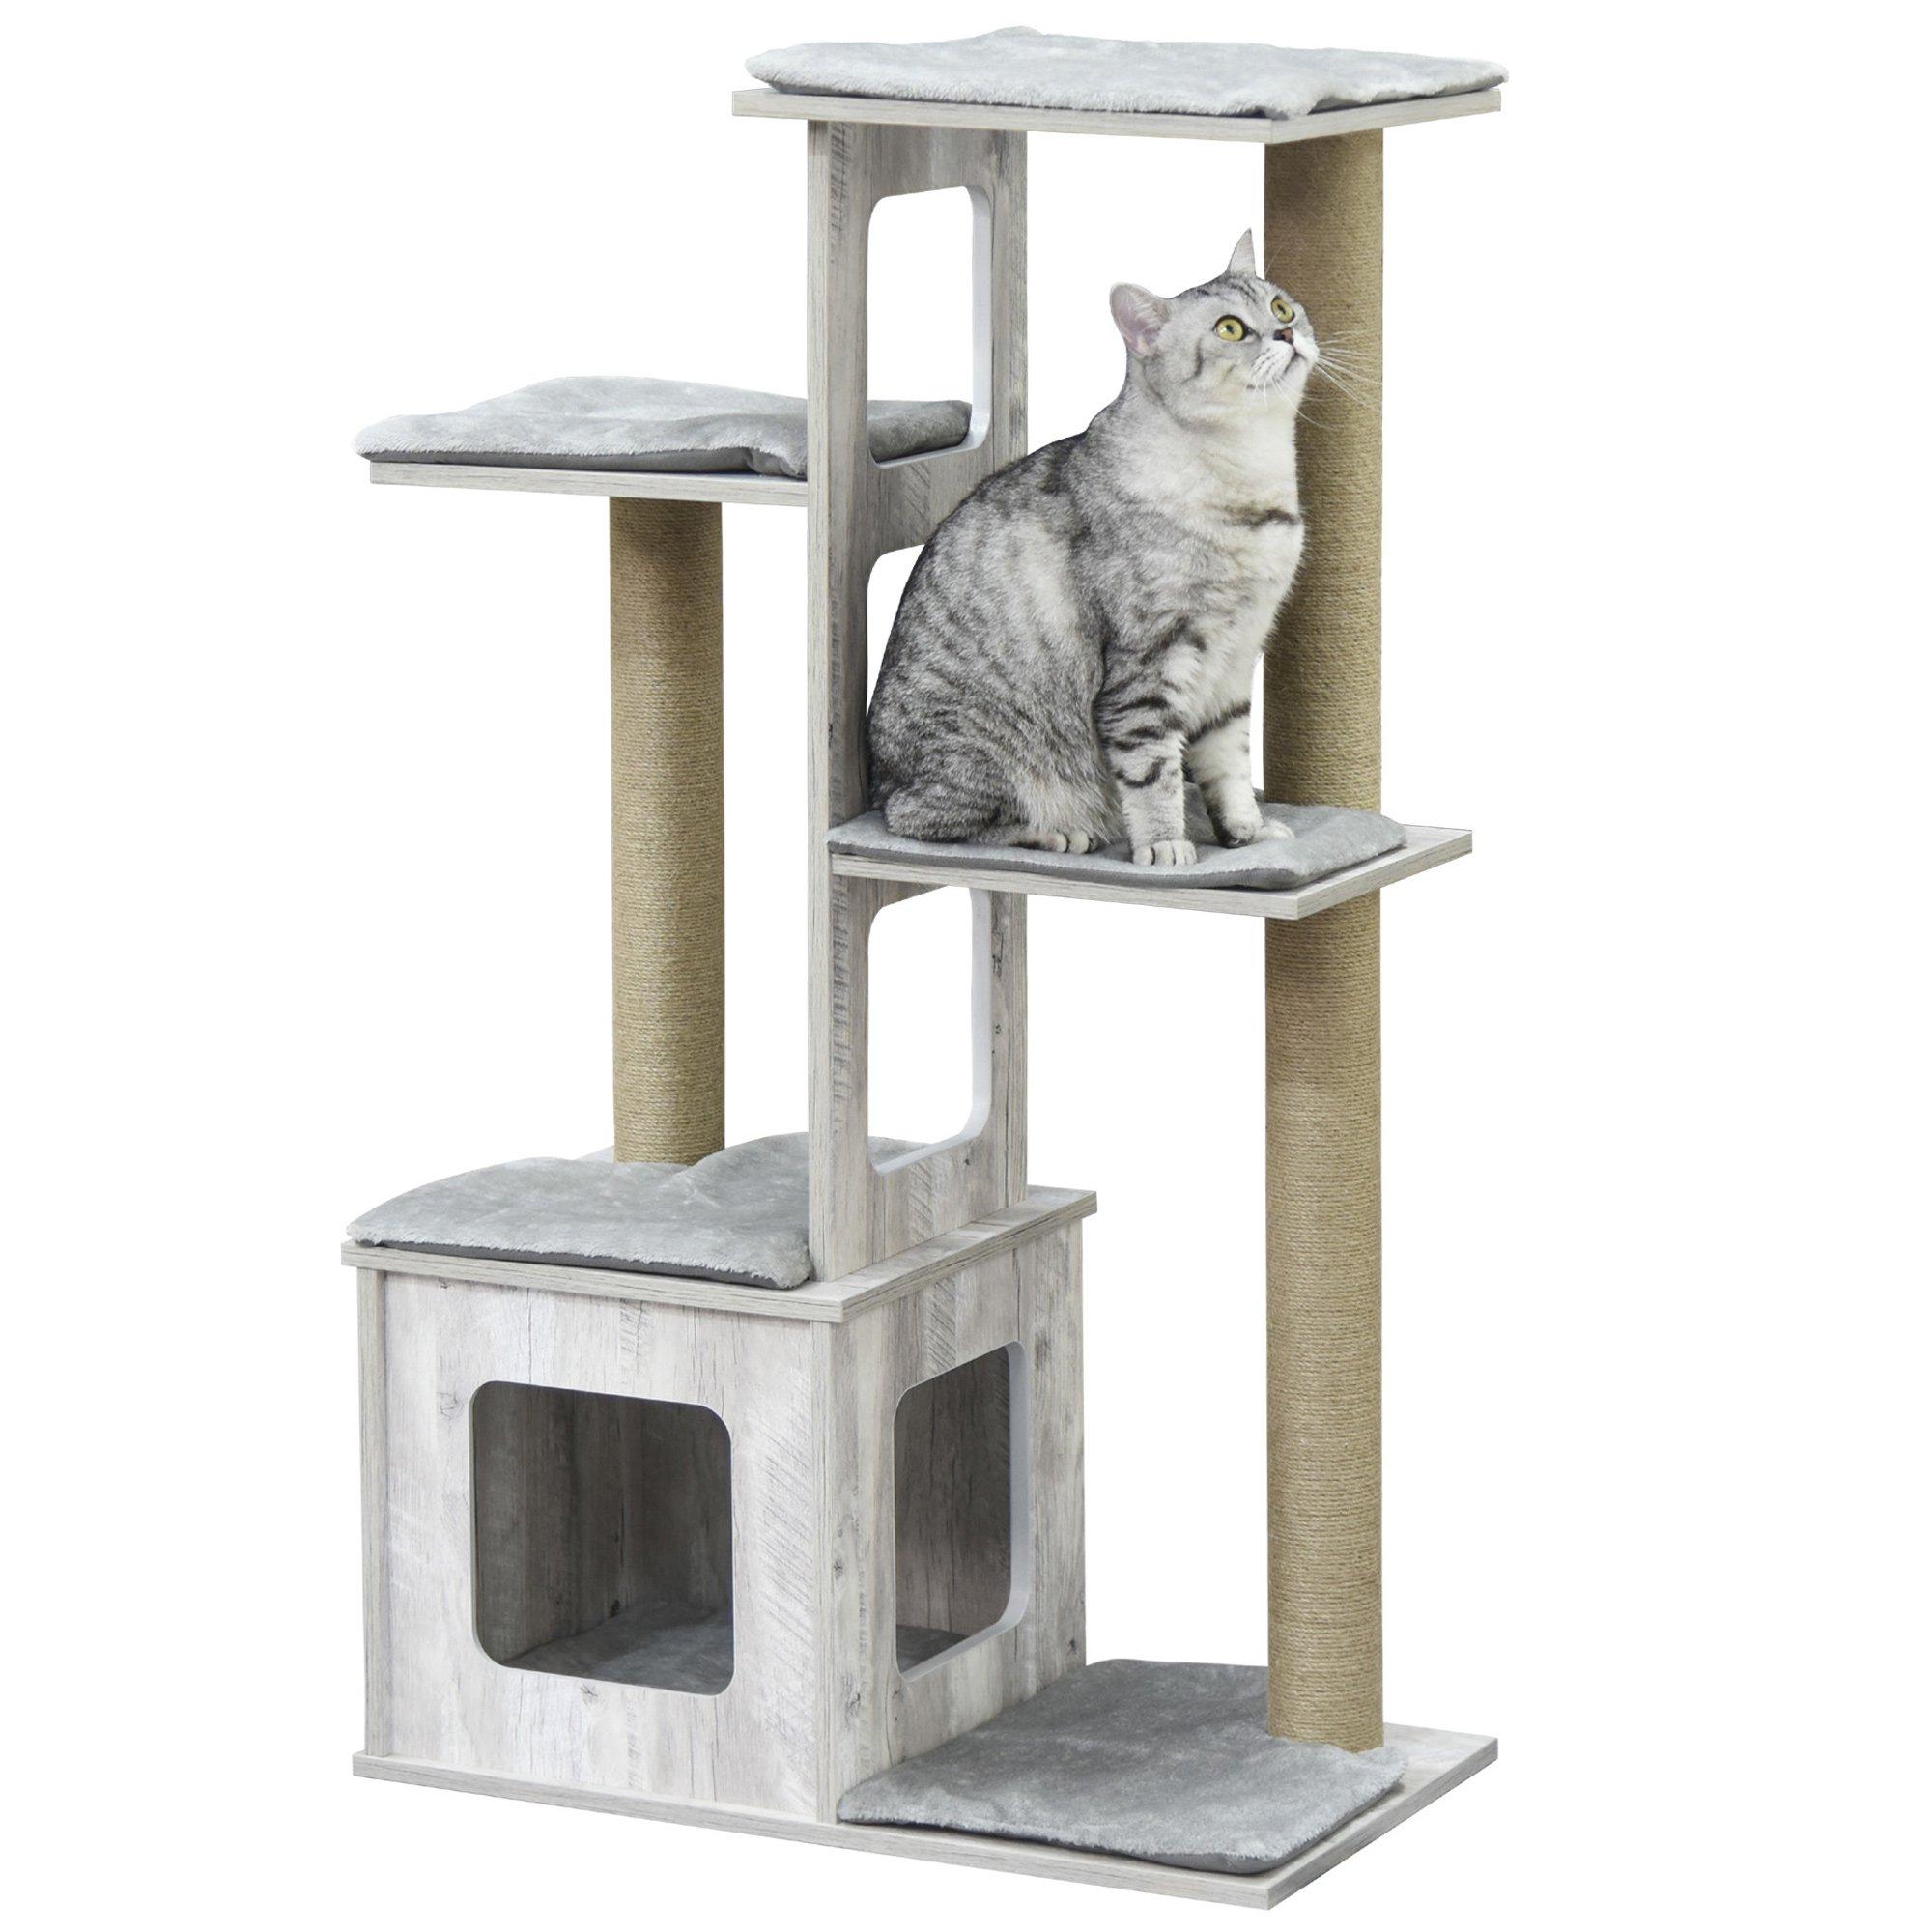 114cm Cat Tree Tower, Cats Activity Centre with Cat House, Scratching Post - Grey